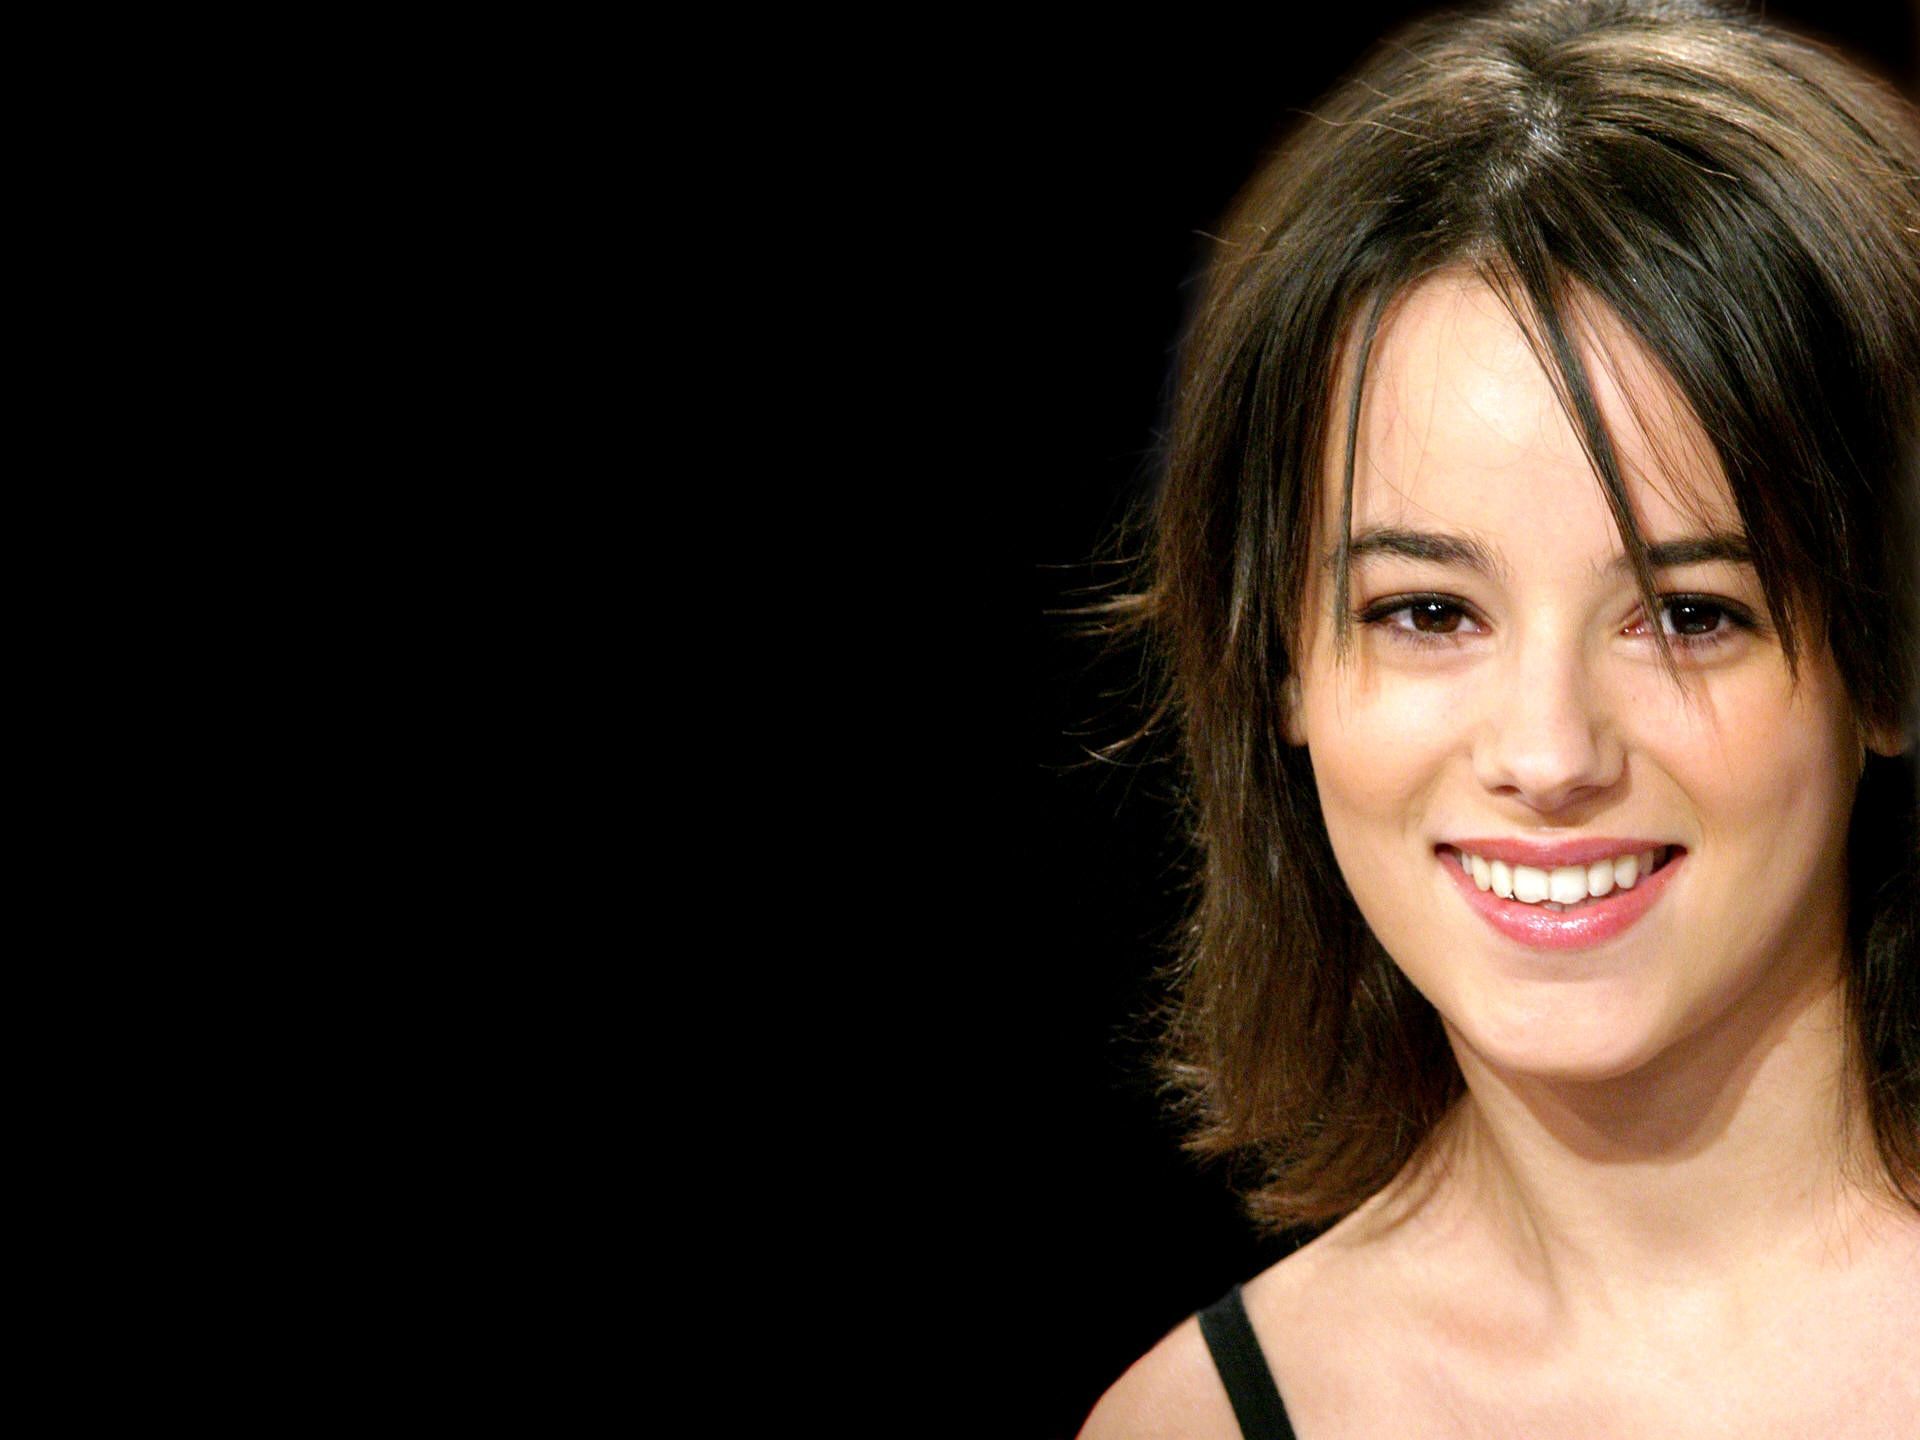 Alizee | Free Desktop Wallpapers for HD, Widescreen and Mobile